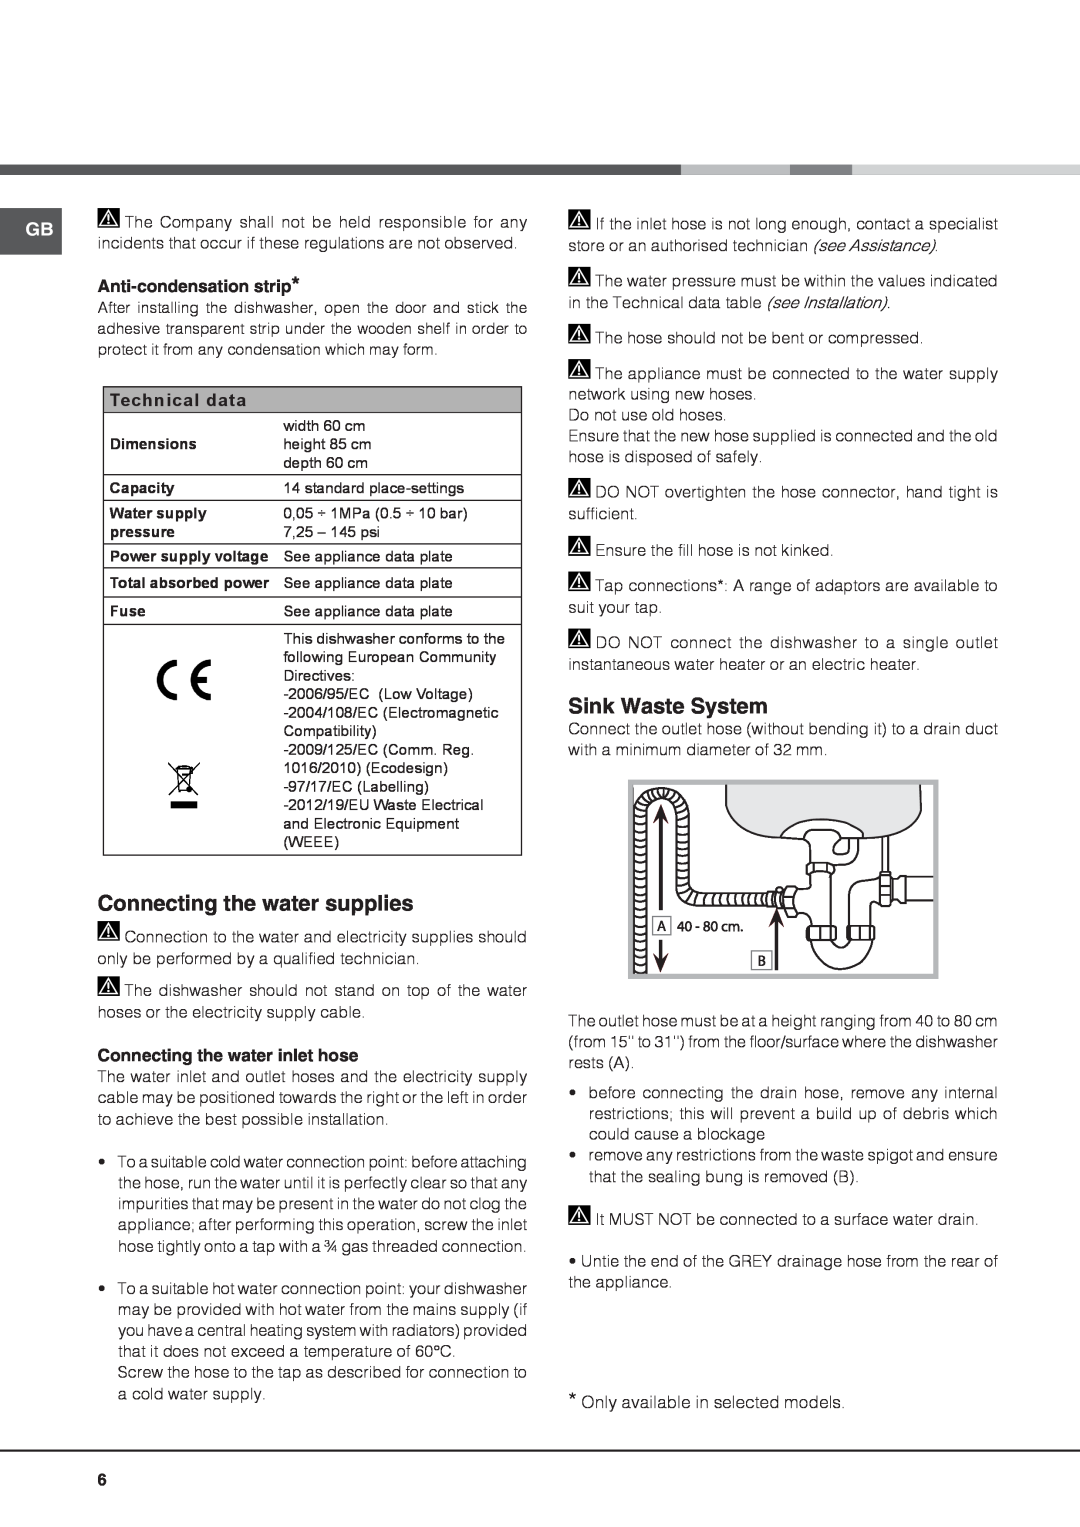 Hotpoint ULTIMA, FDUD 43133 manual Connecting the water supplies, Sink Waste System, Anti-condensationstrip, Technical data 